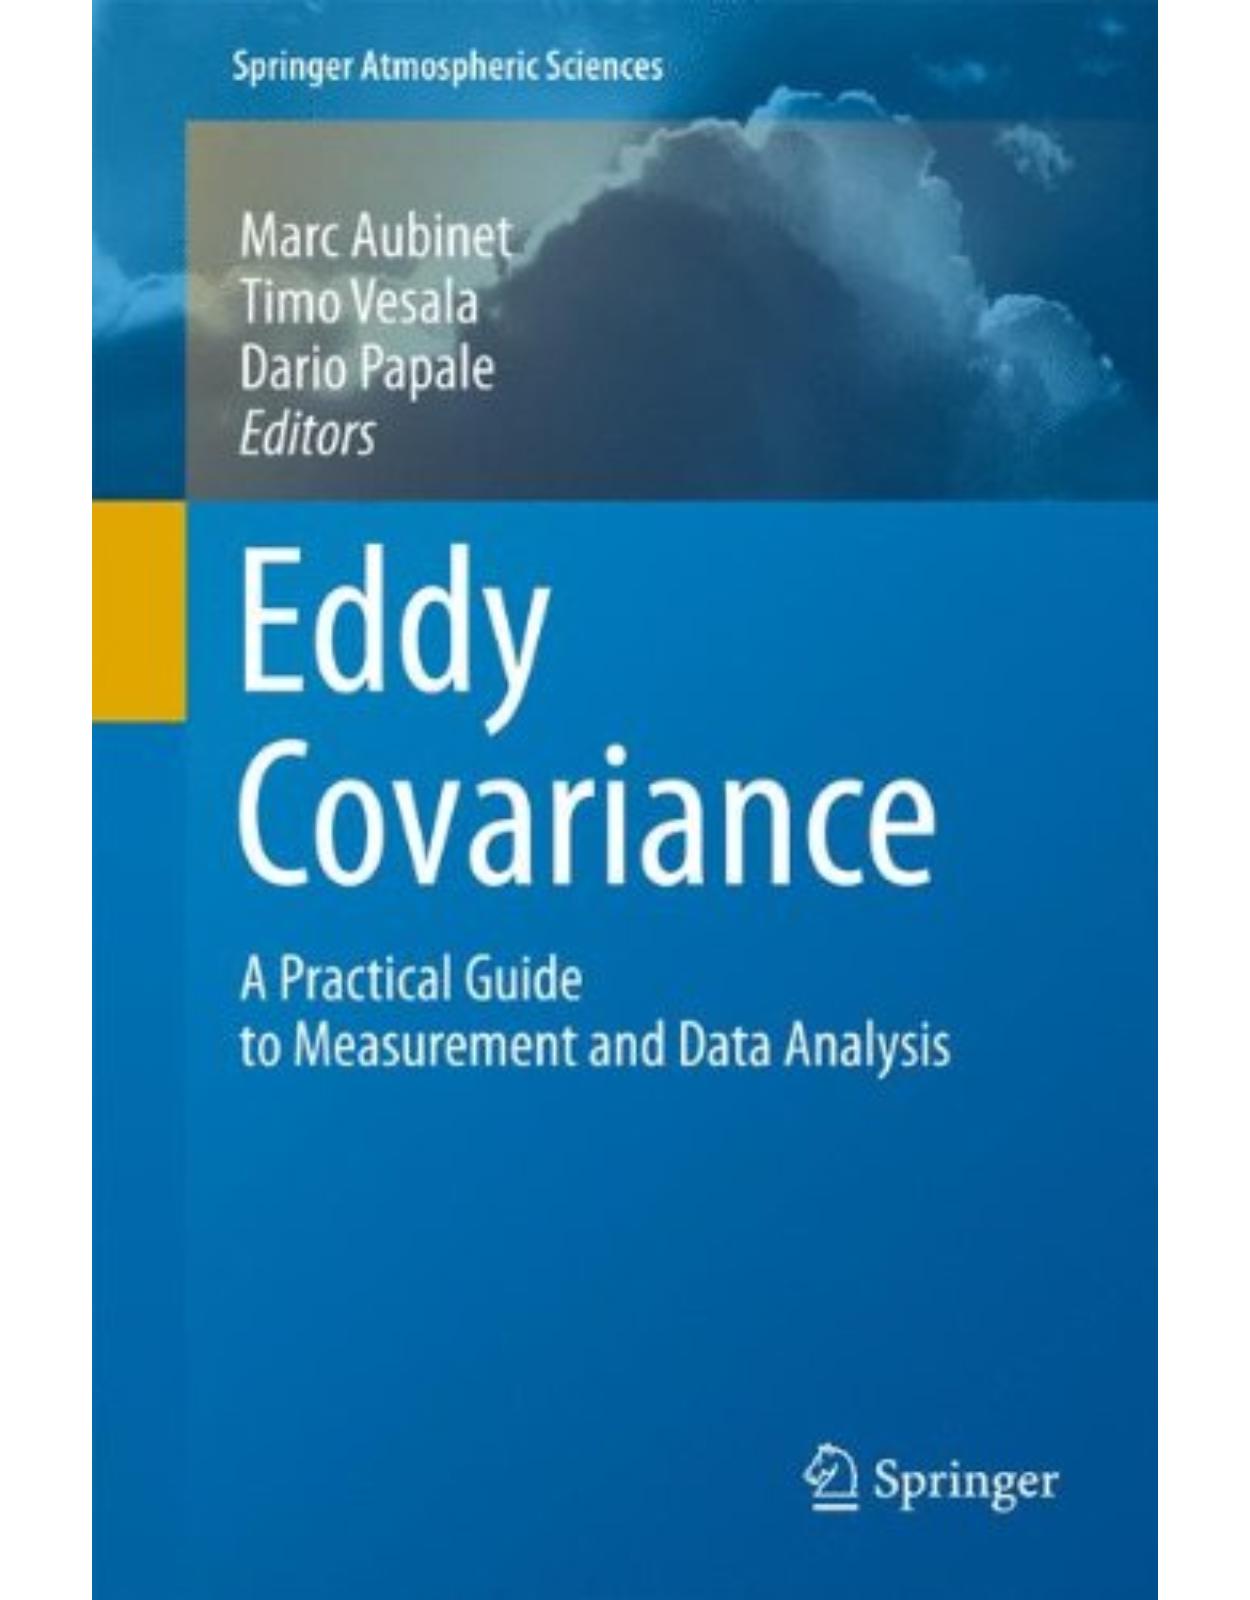 Eddy Covariance: A Practical Guide to Measurement and Data Analysis (Springer Atmospheric Sciences)